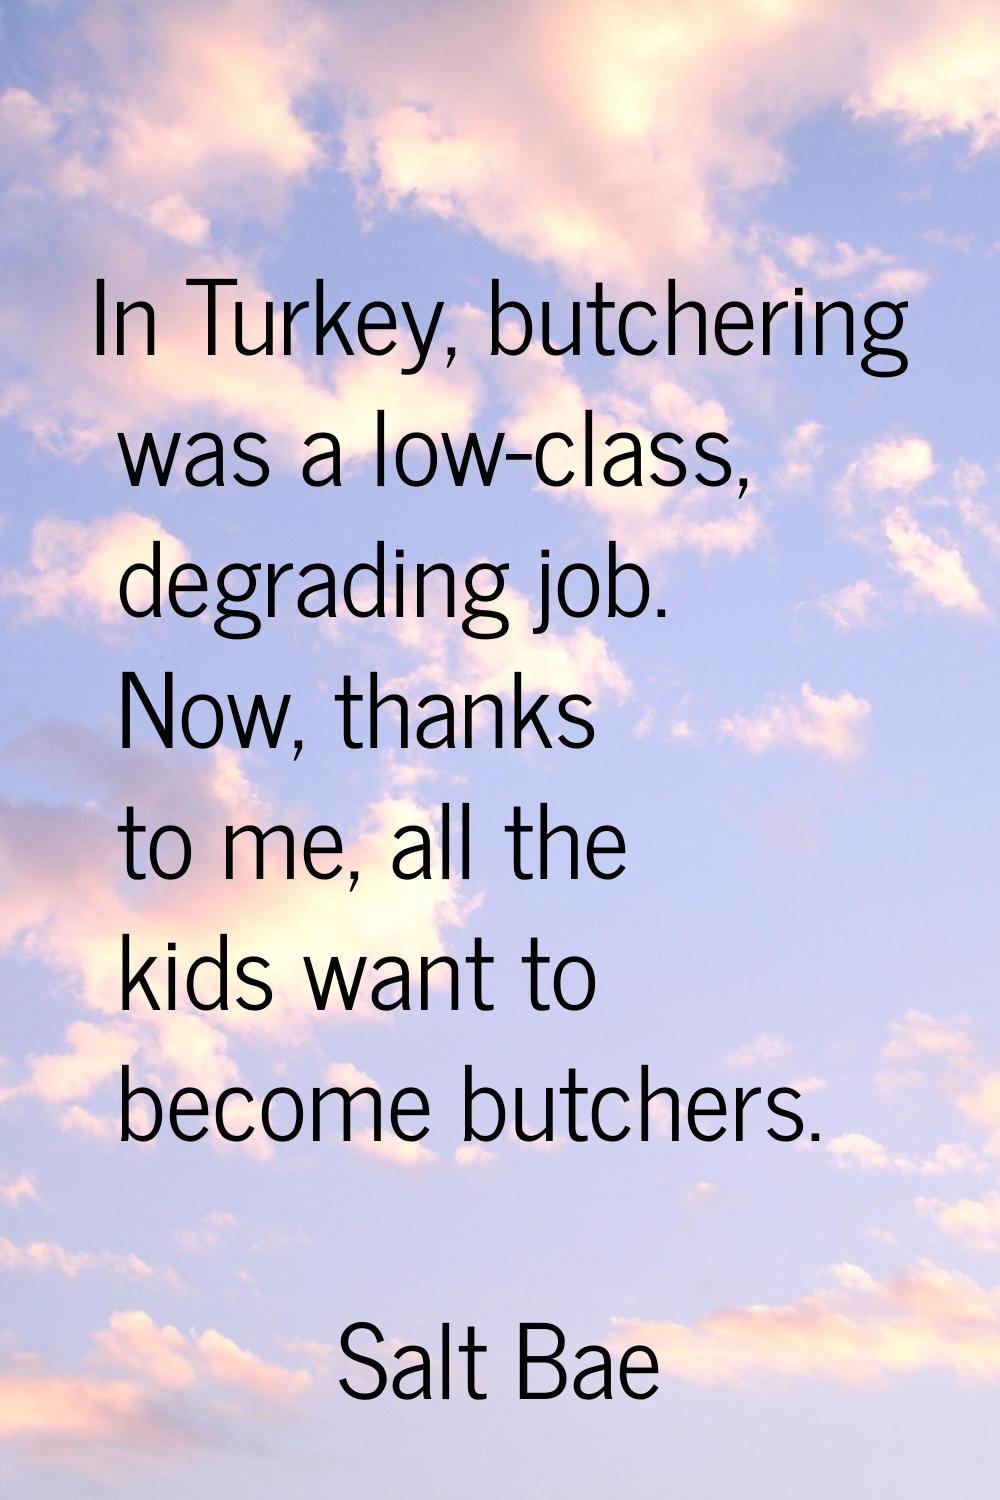 In Turkey, butchering was a low-class, degrading job. Now, thanks to me, all the kids want to becom